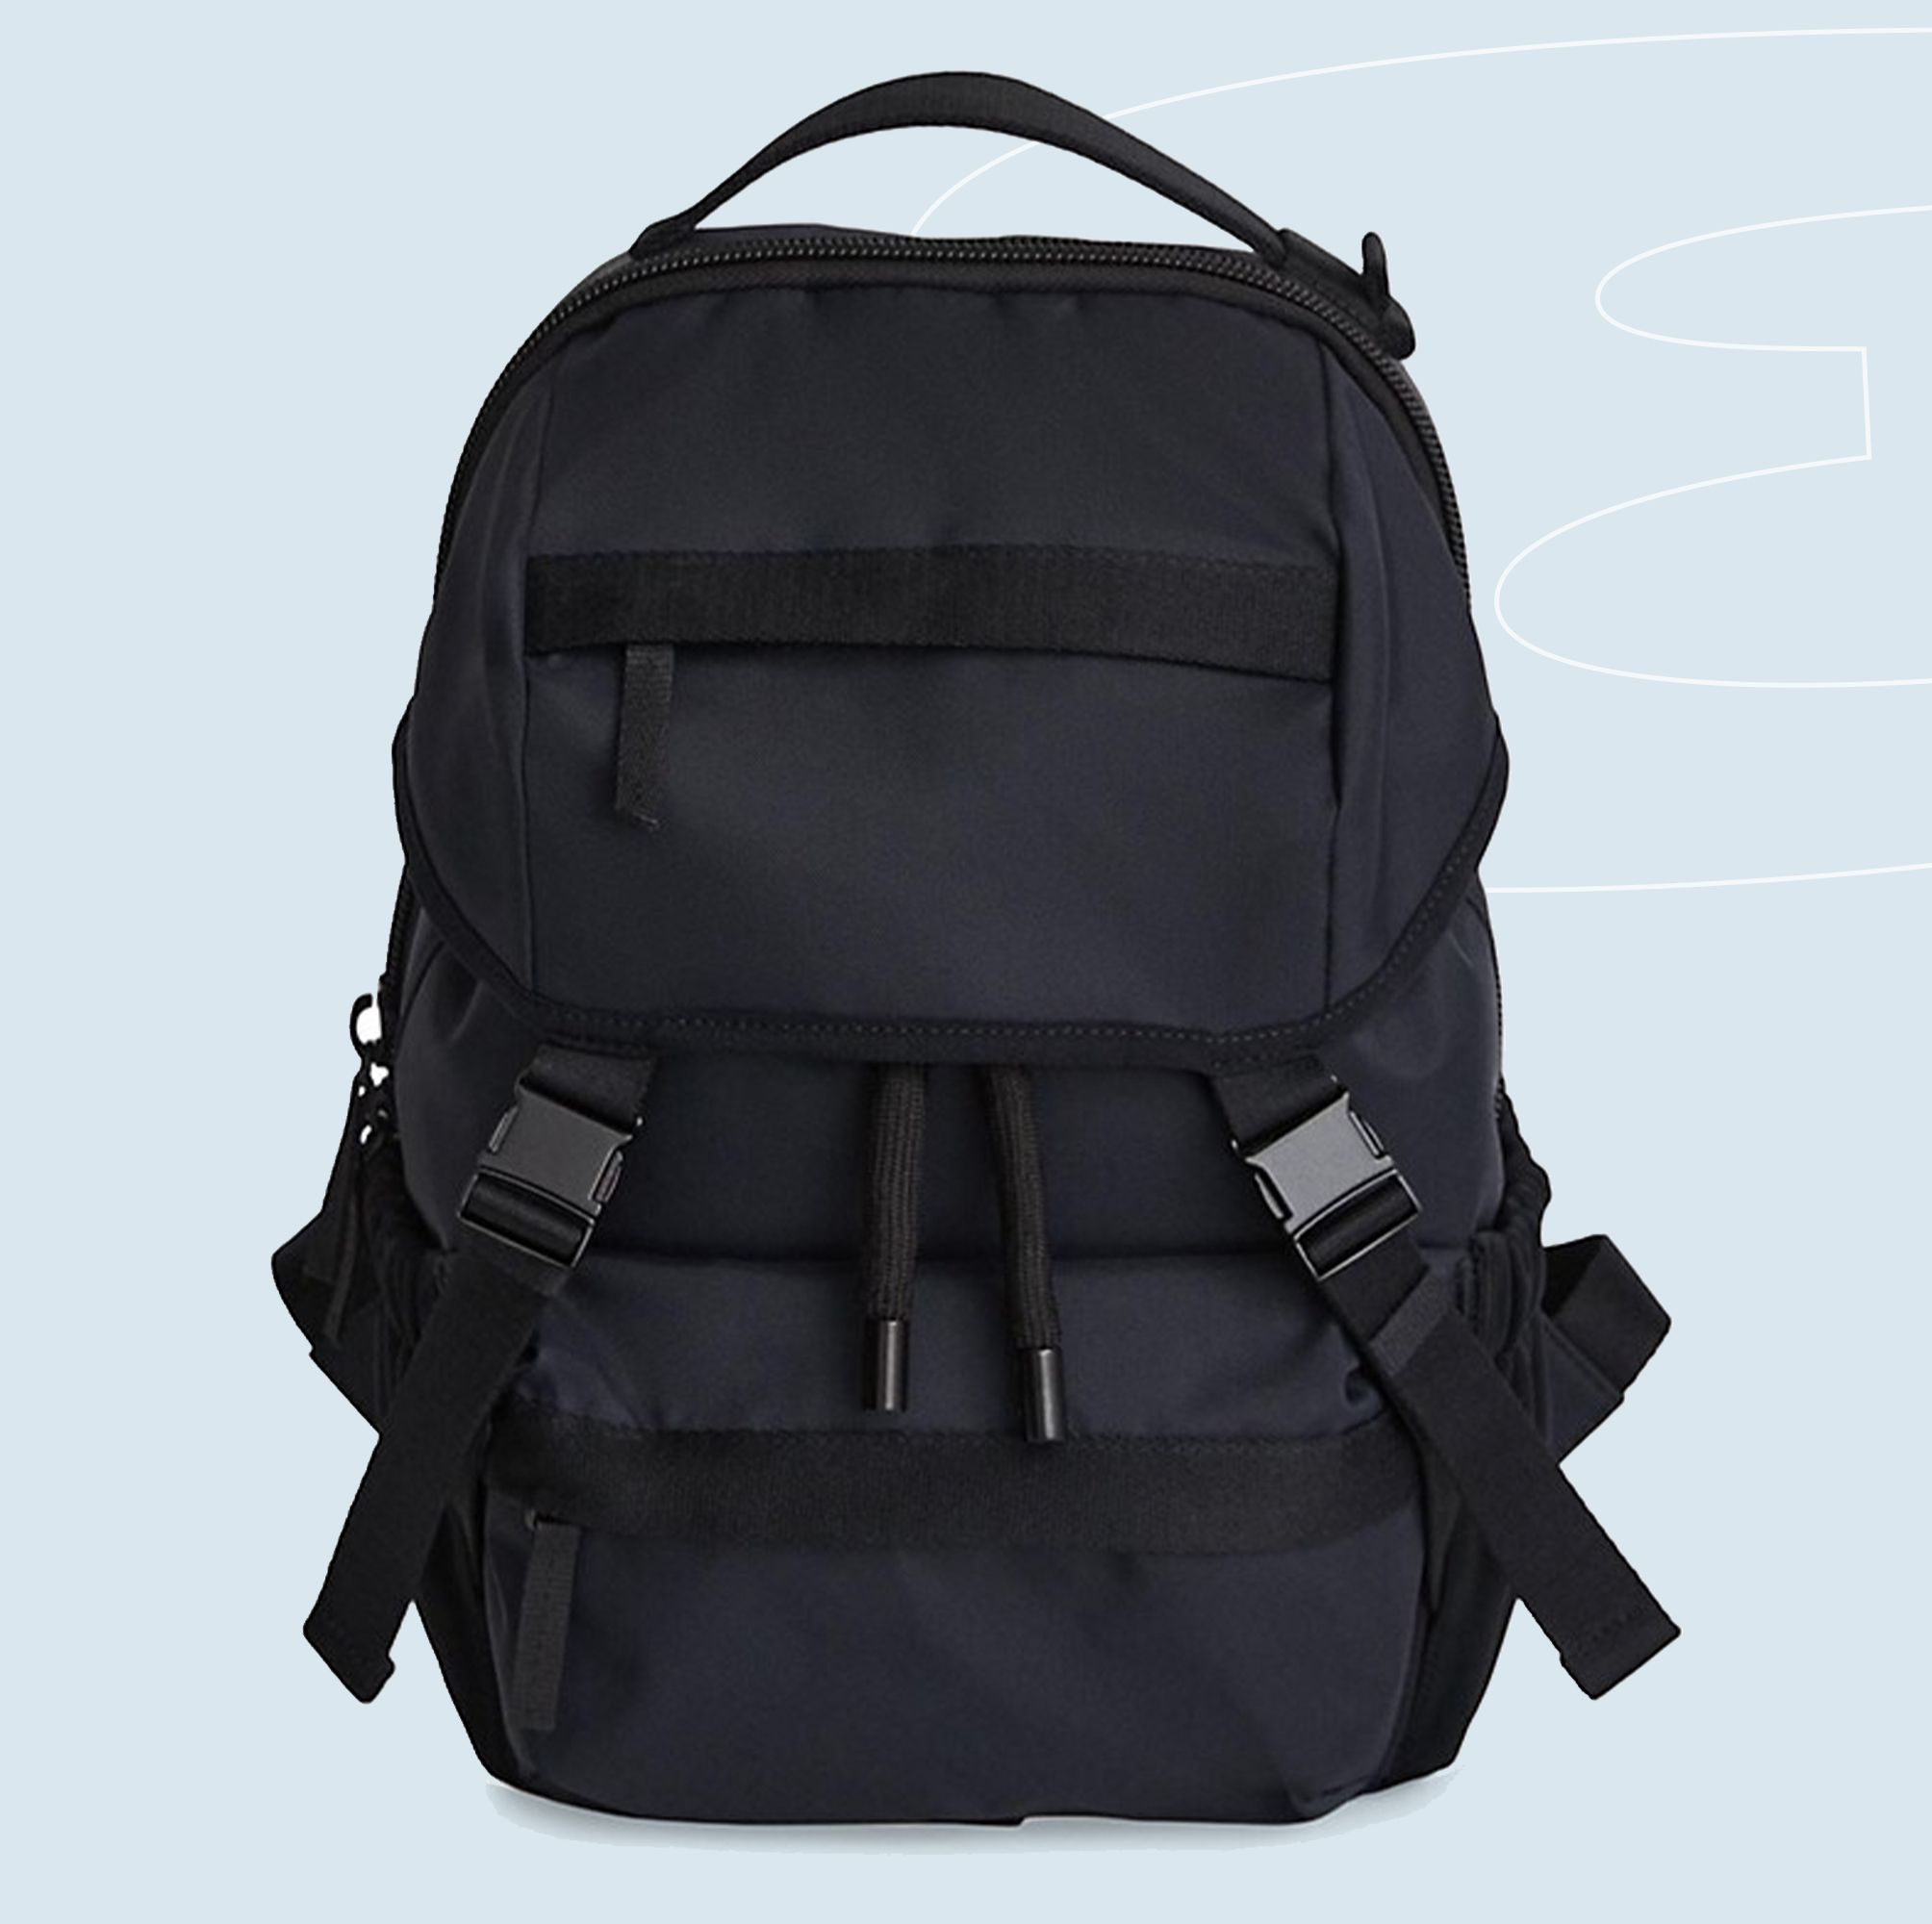 The 10 Best Travel Backpacks to Take on the Go